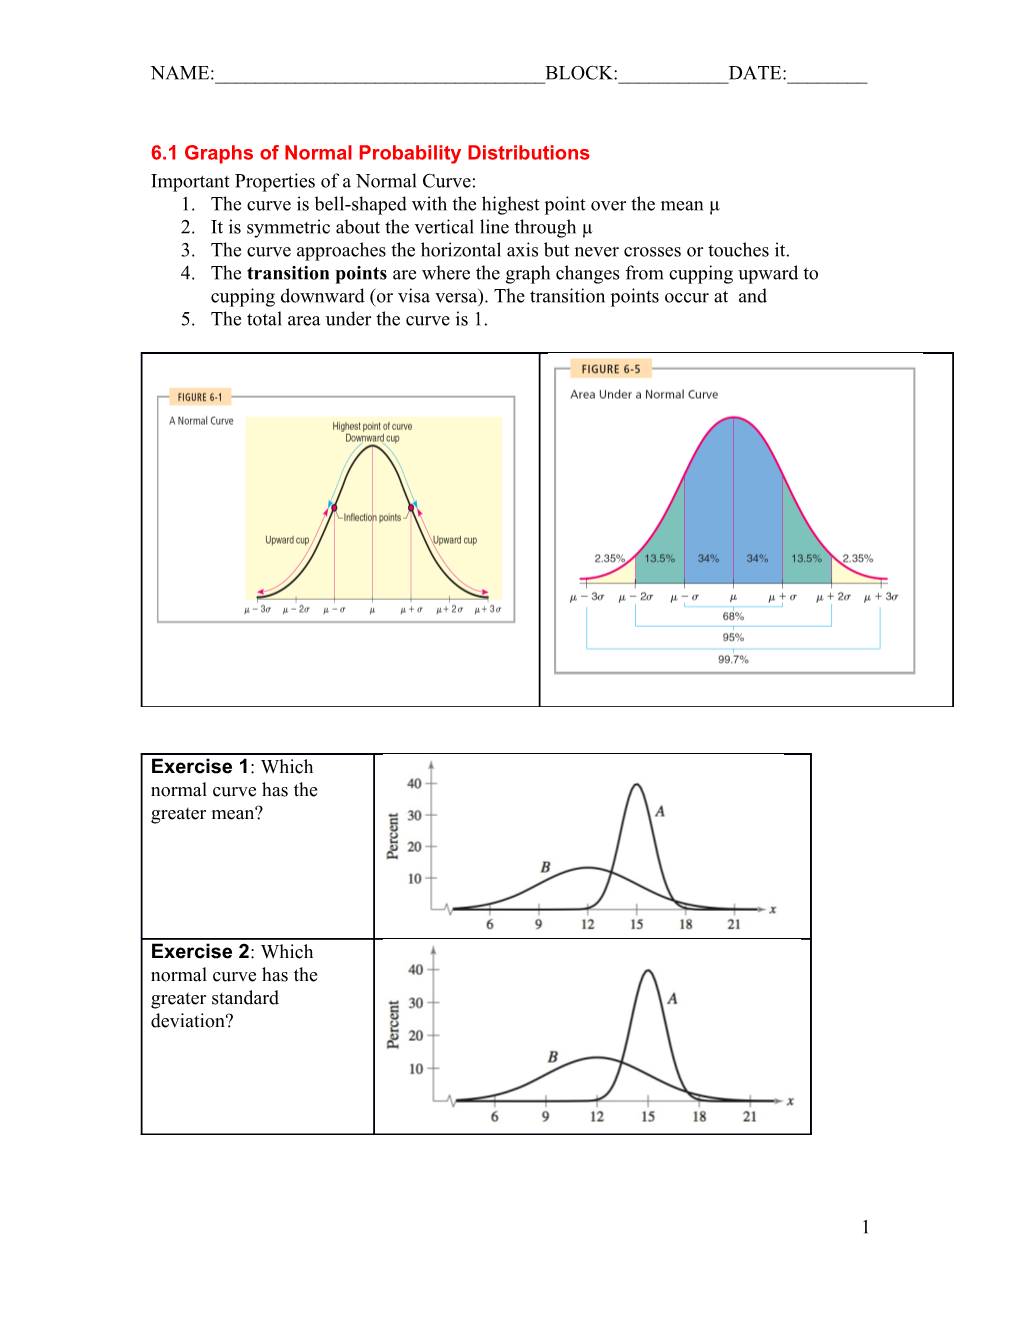 6.1 Graphs of Normal Probability Distributions